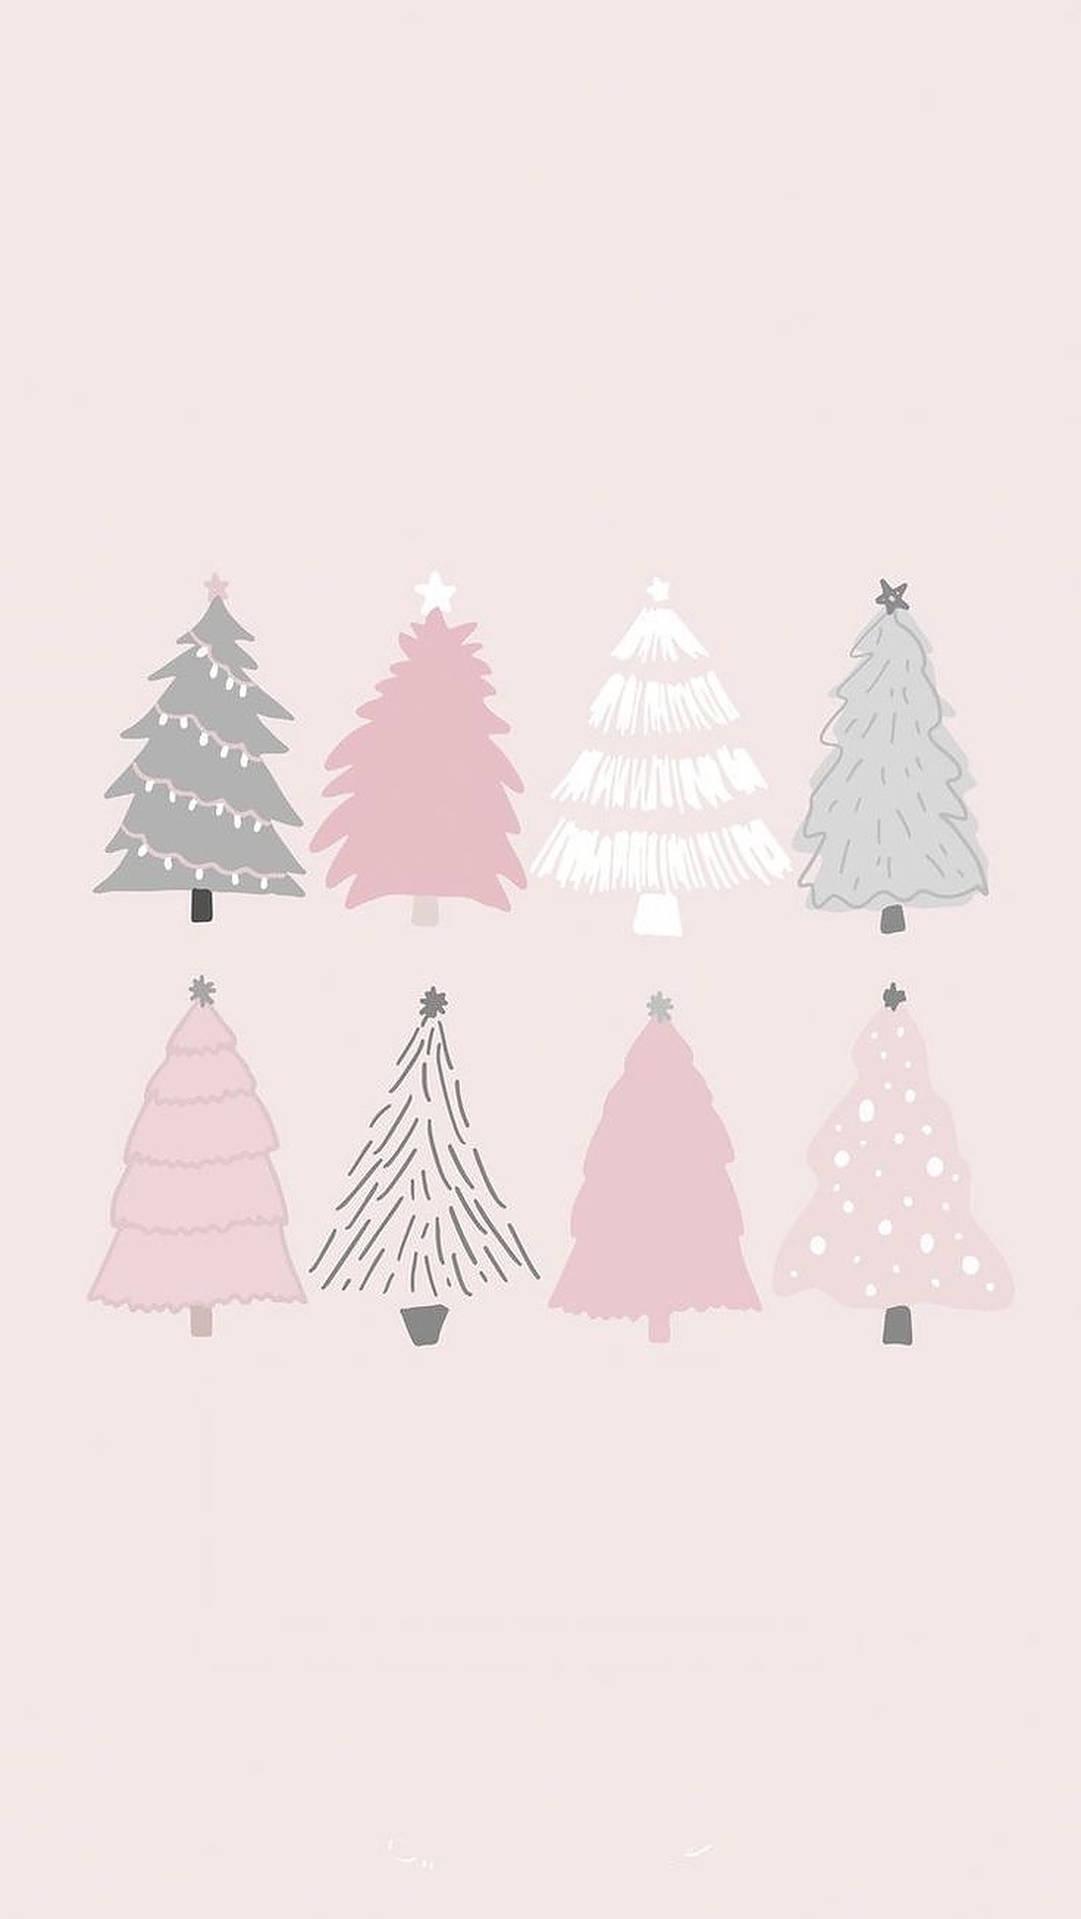 Download Cute Aesthetic Christmas Trees Wallpaper